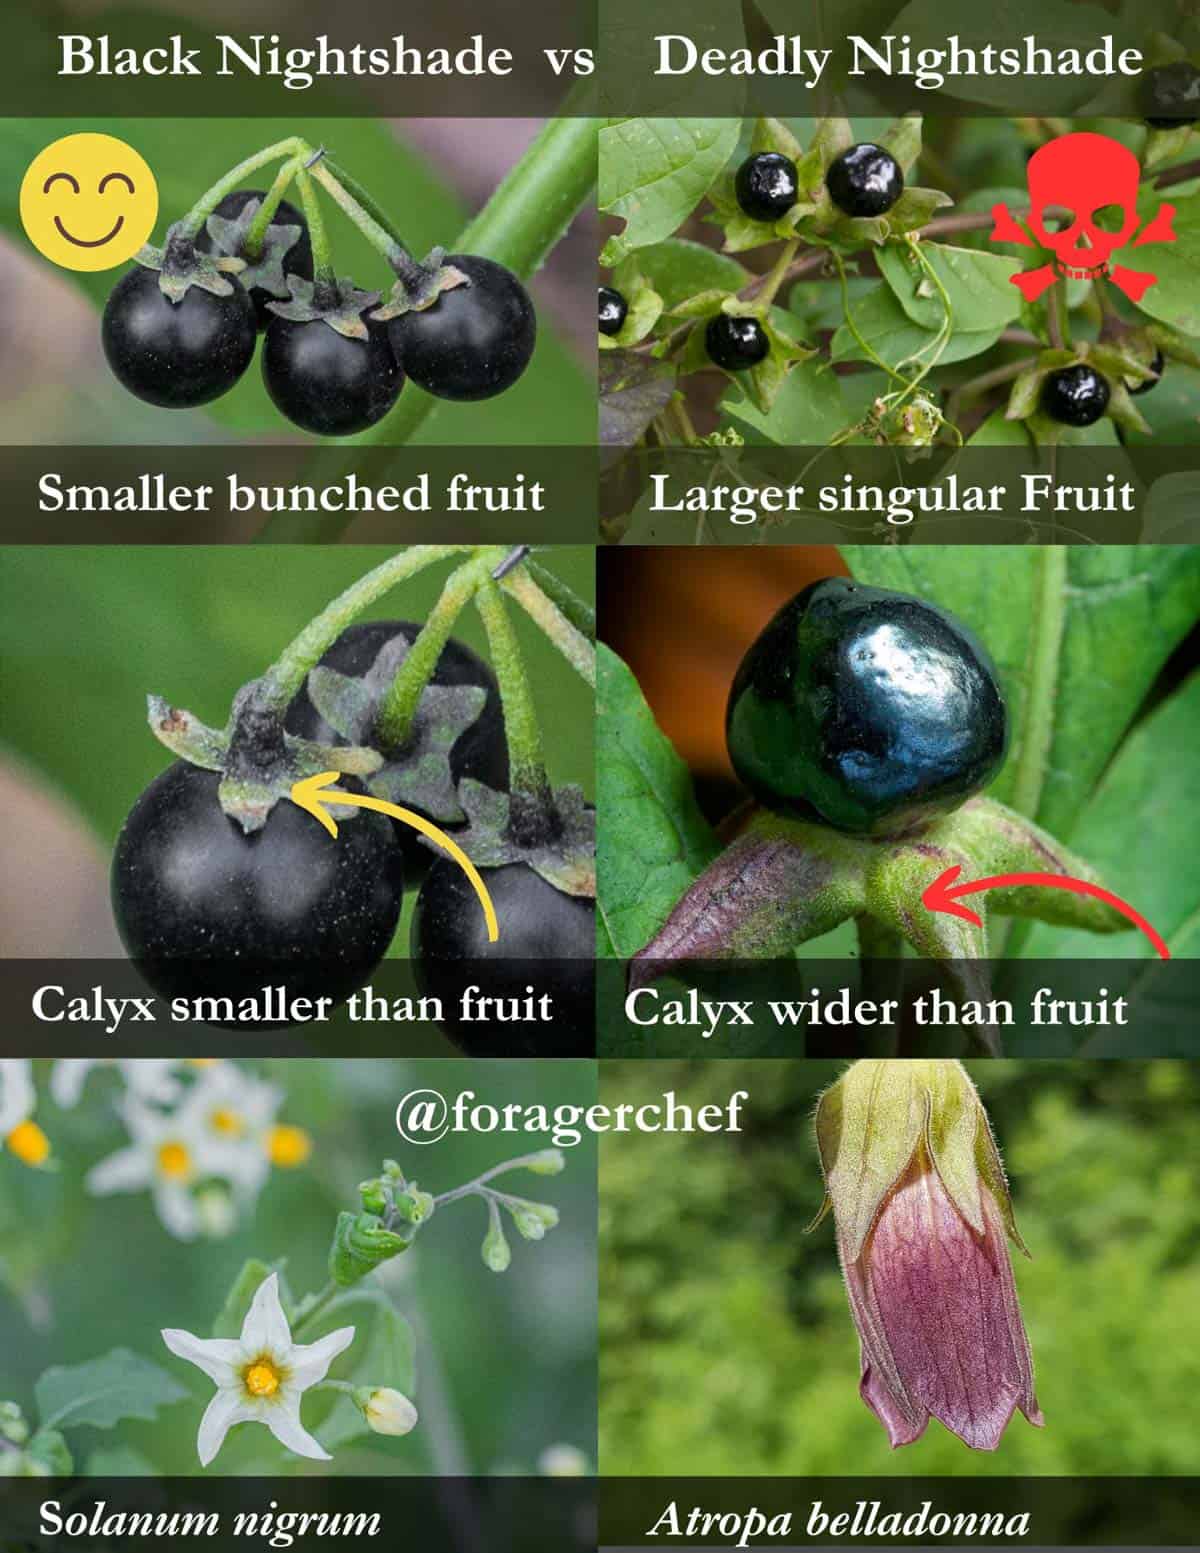 An infographic containing 6 images comparing the identification differences of edible black nightshade vs deadly nightshade including fruit, leaves, and flowers.